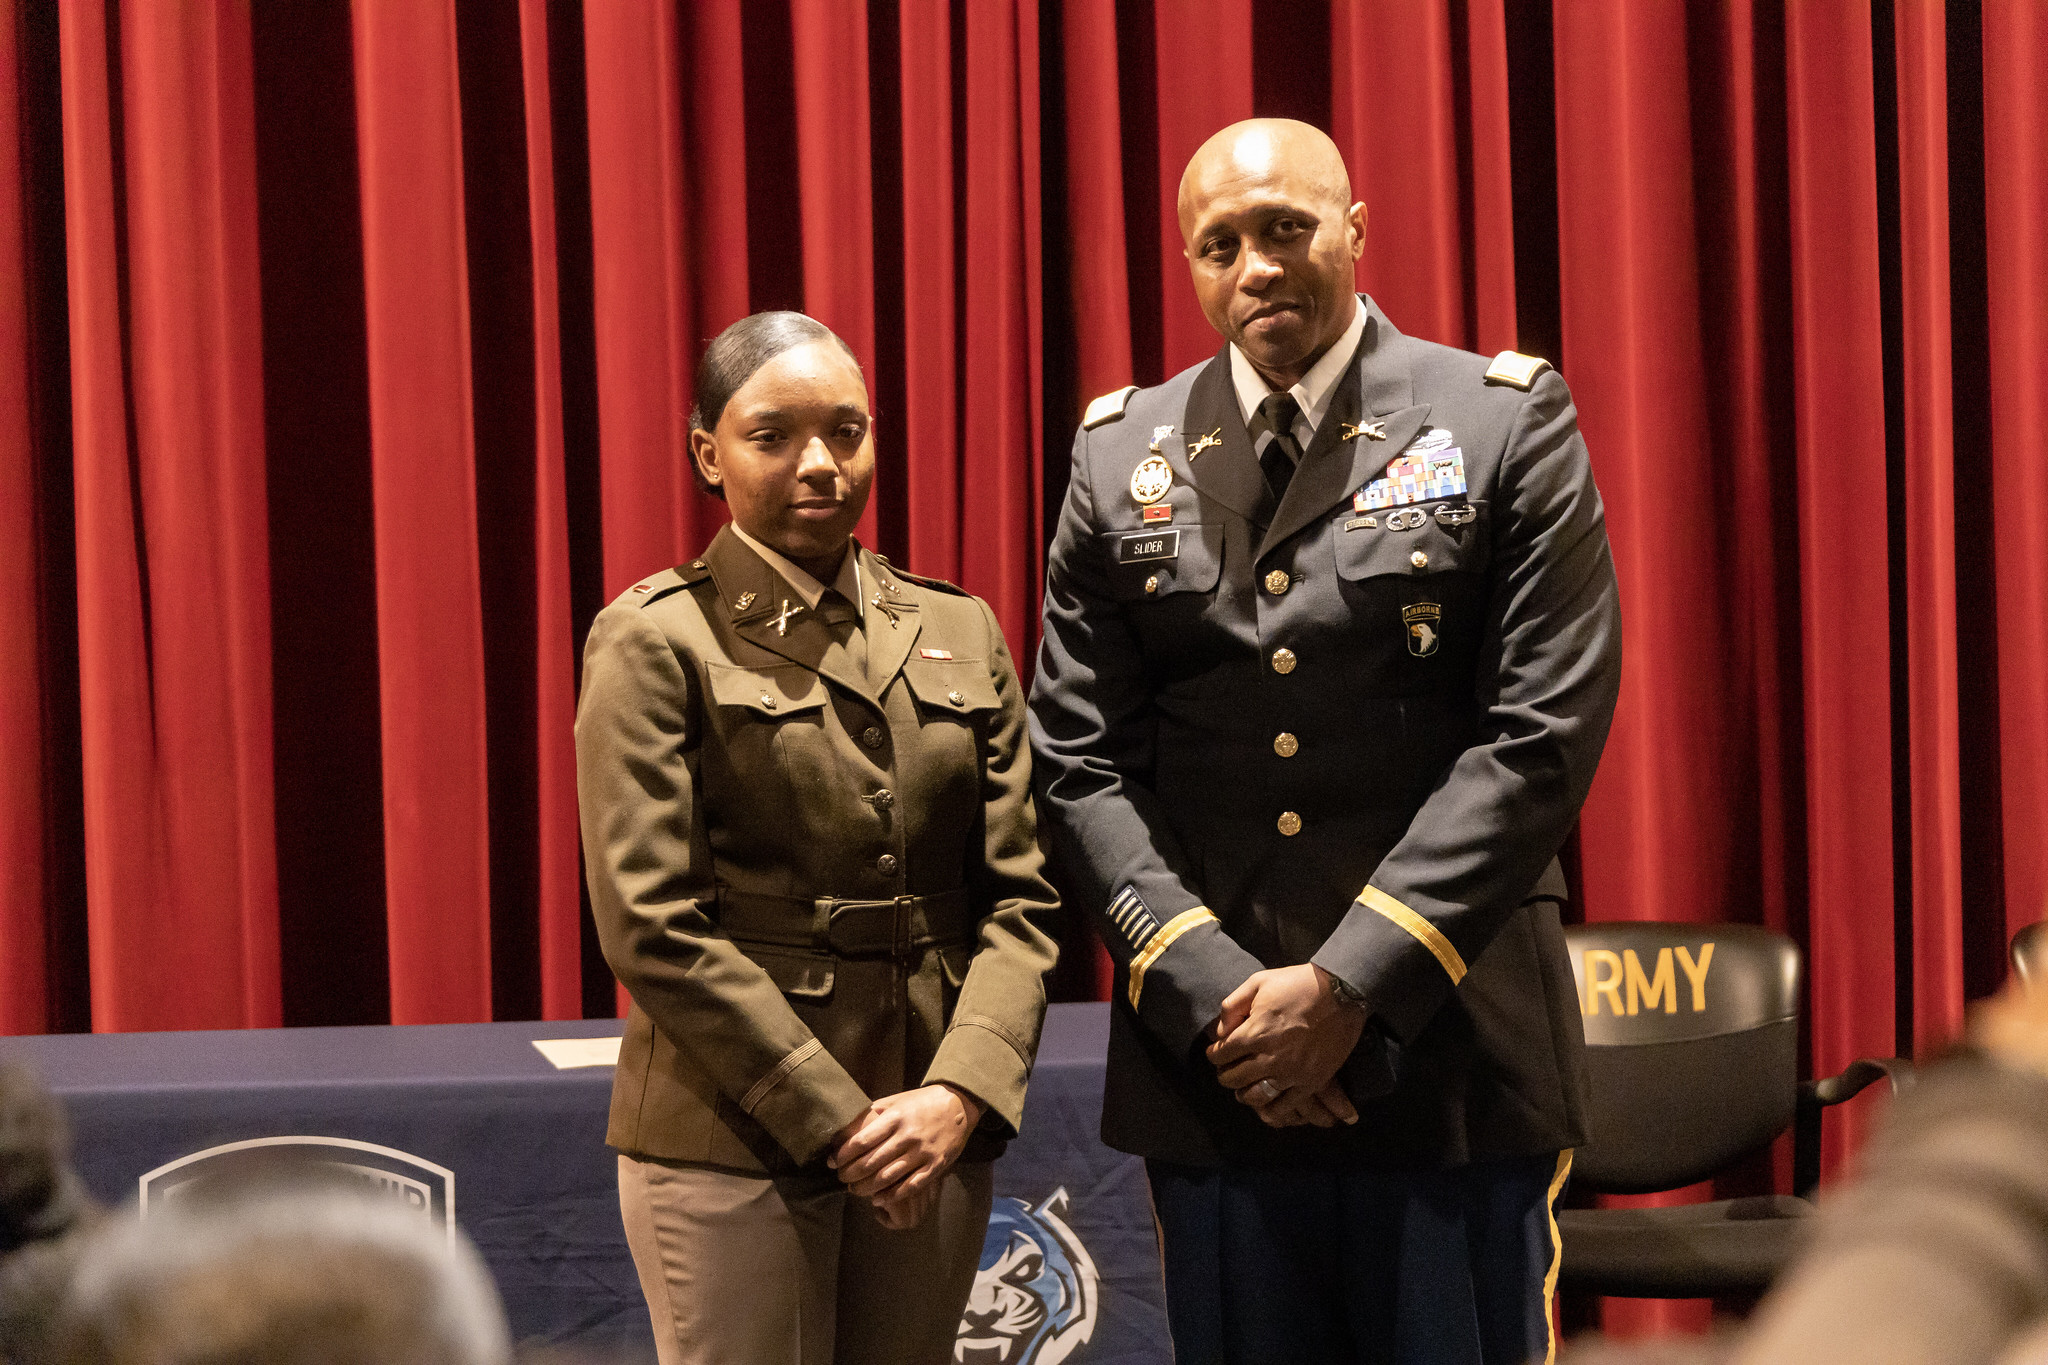 Lincoln University of Missouri alumni Lt. Col. Charles V. Slider III (right) spoke during the Fall 2022 Commissioning Ceremony for Cadet Christiaunna Kelley (left), the first female combat arms officer to commission from Lincoln’s Army ROTC program.